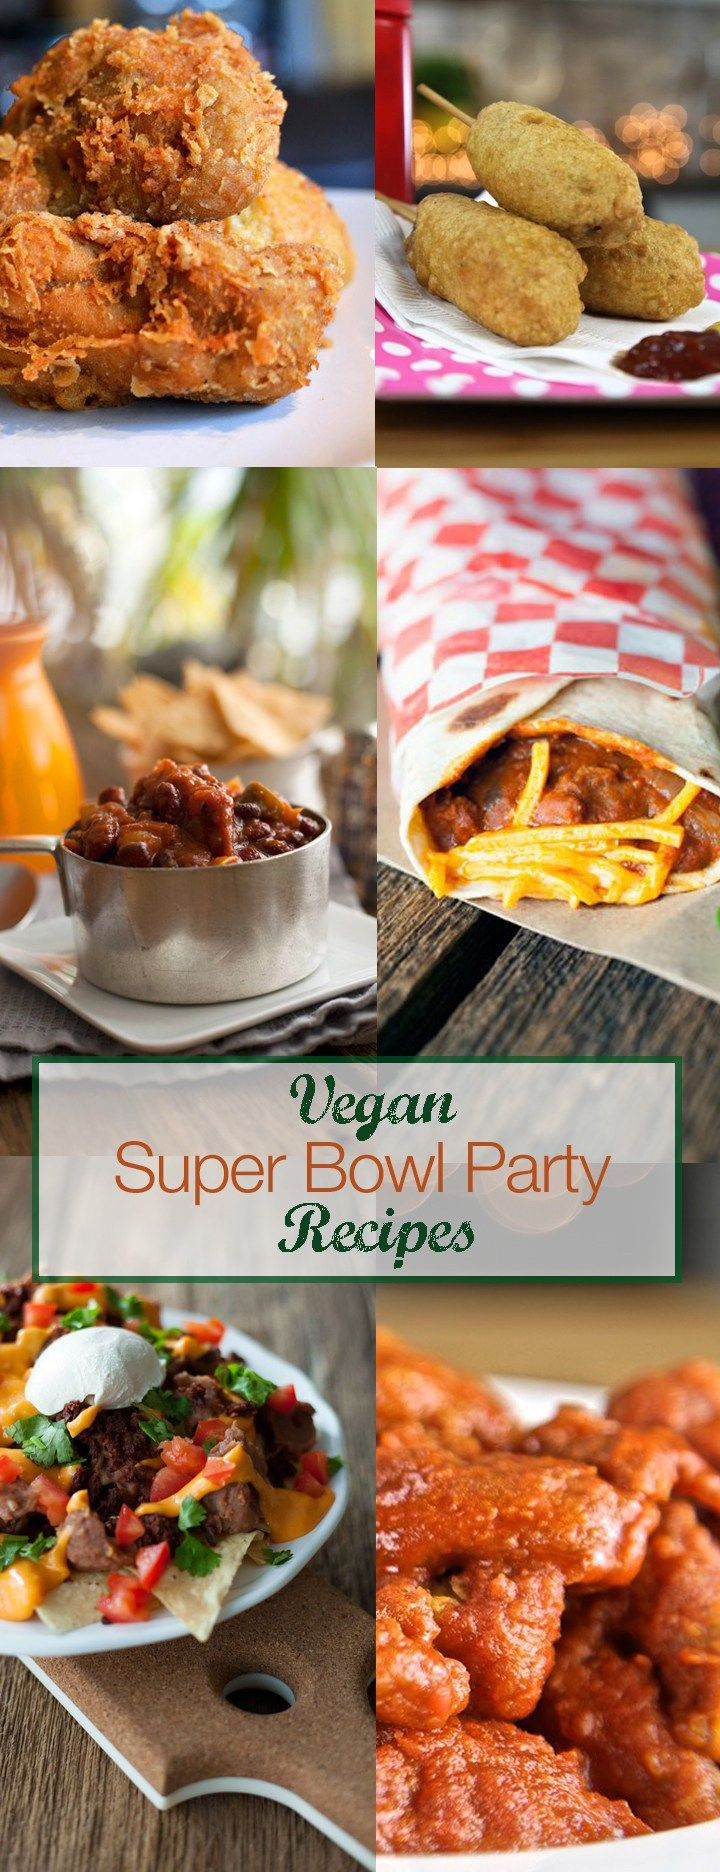 Super Easy Vegan Recipes
 98 best images about Sports on Pinterest